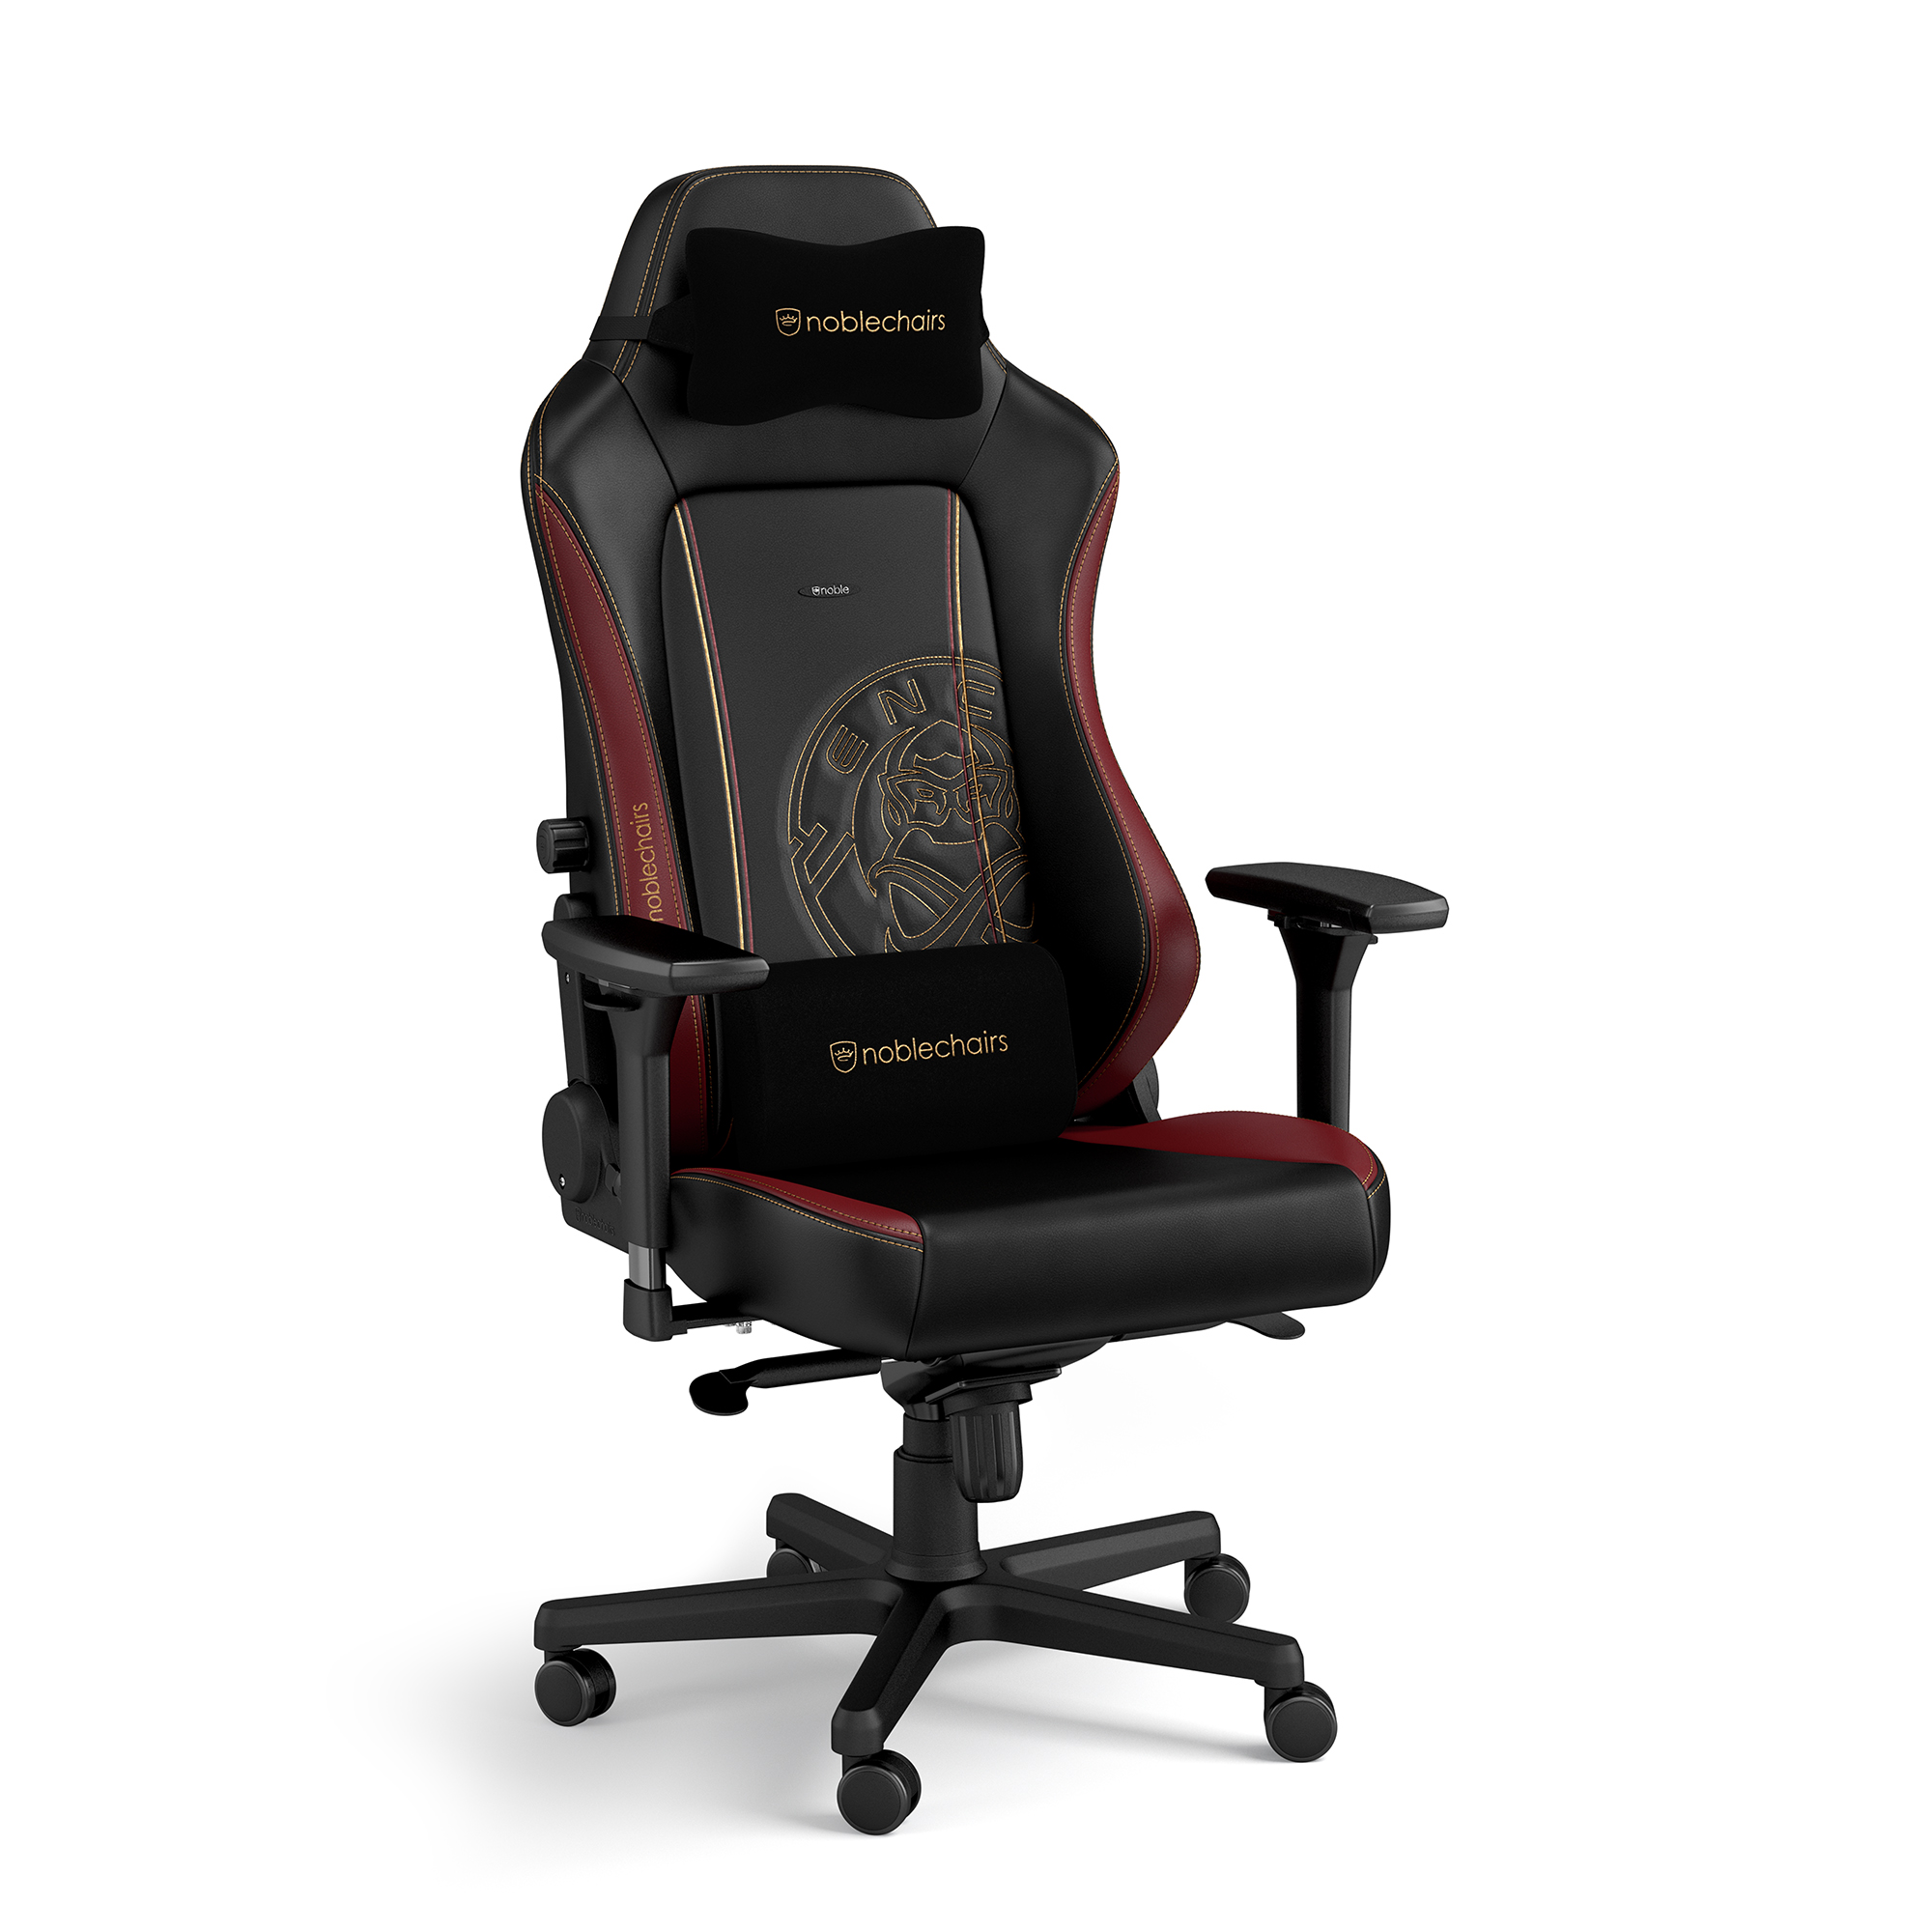 noblechairs - noblechairs HERO Gaming Chair - ENCE Edition